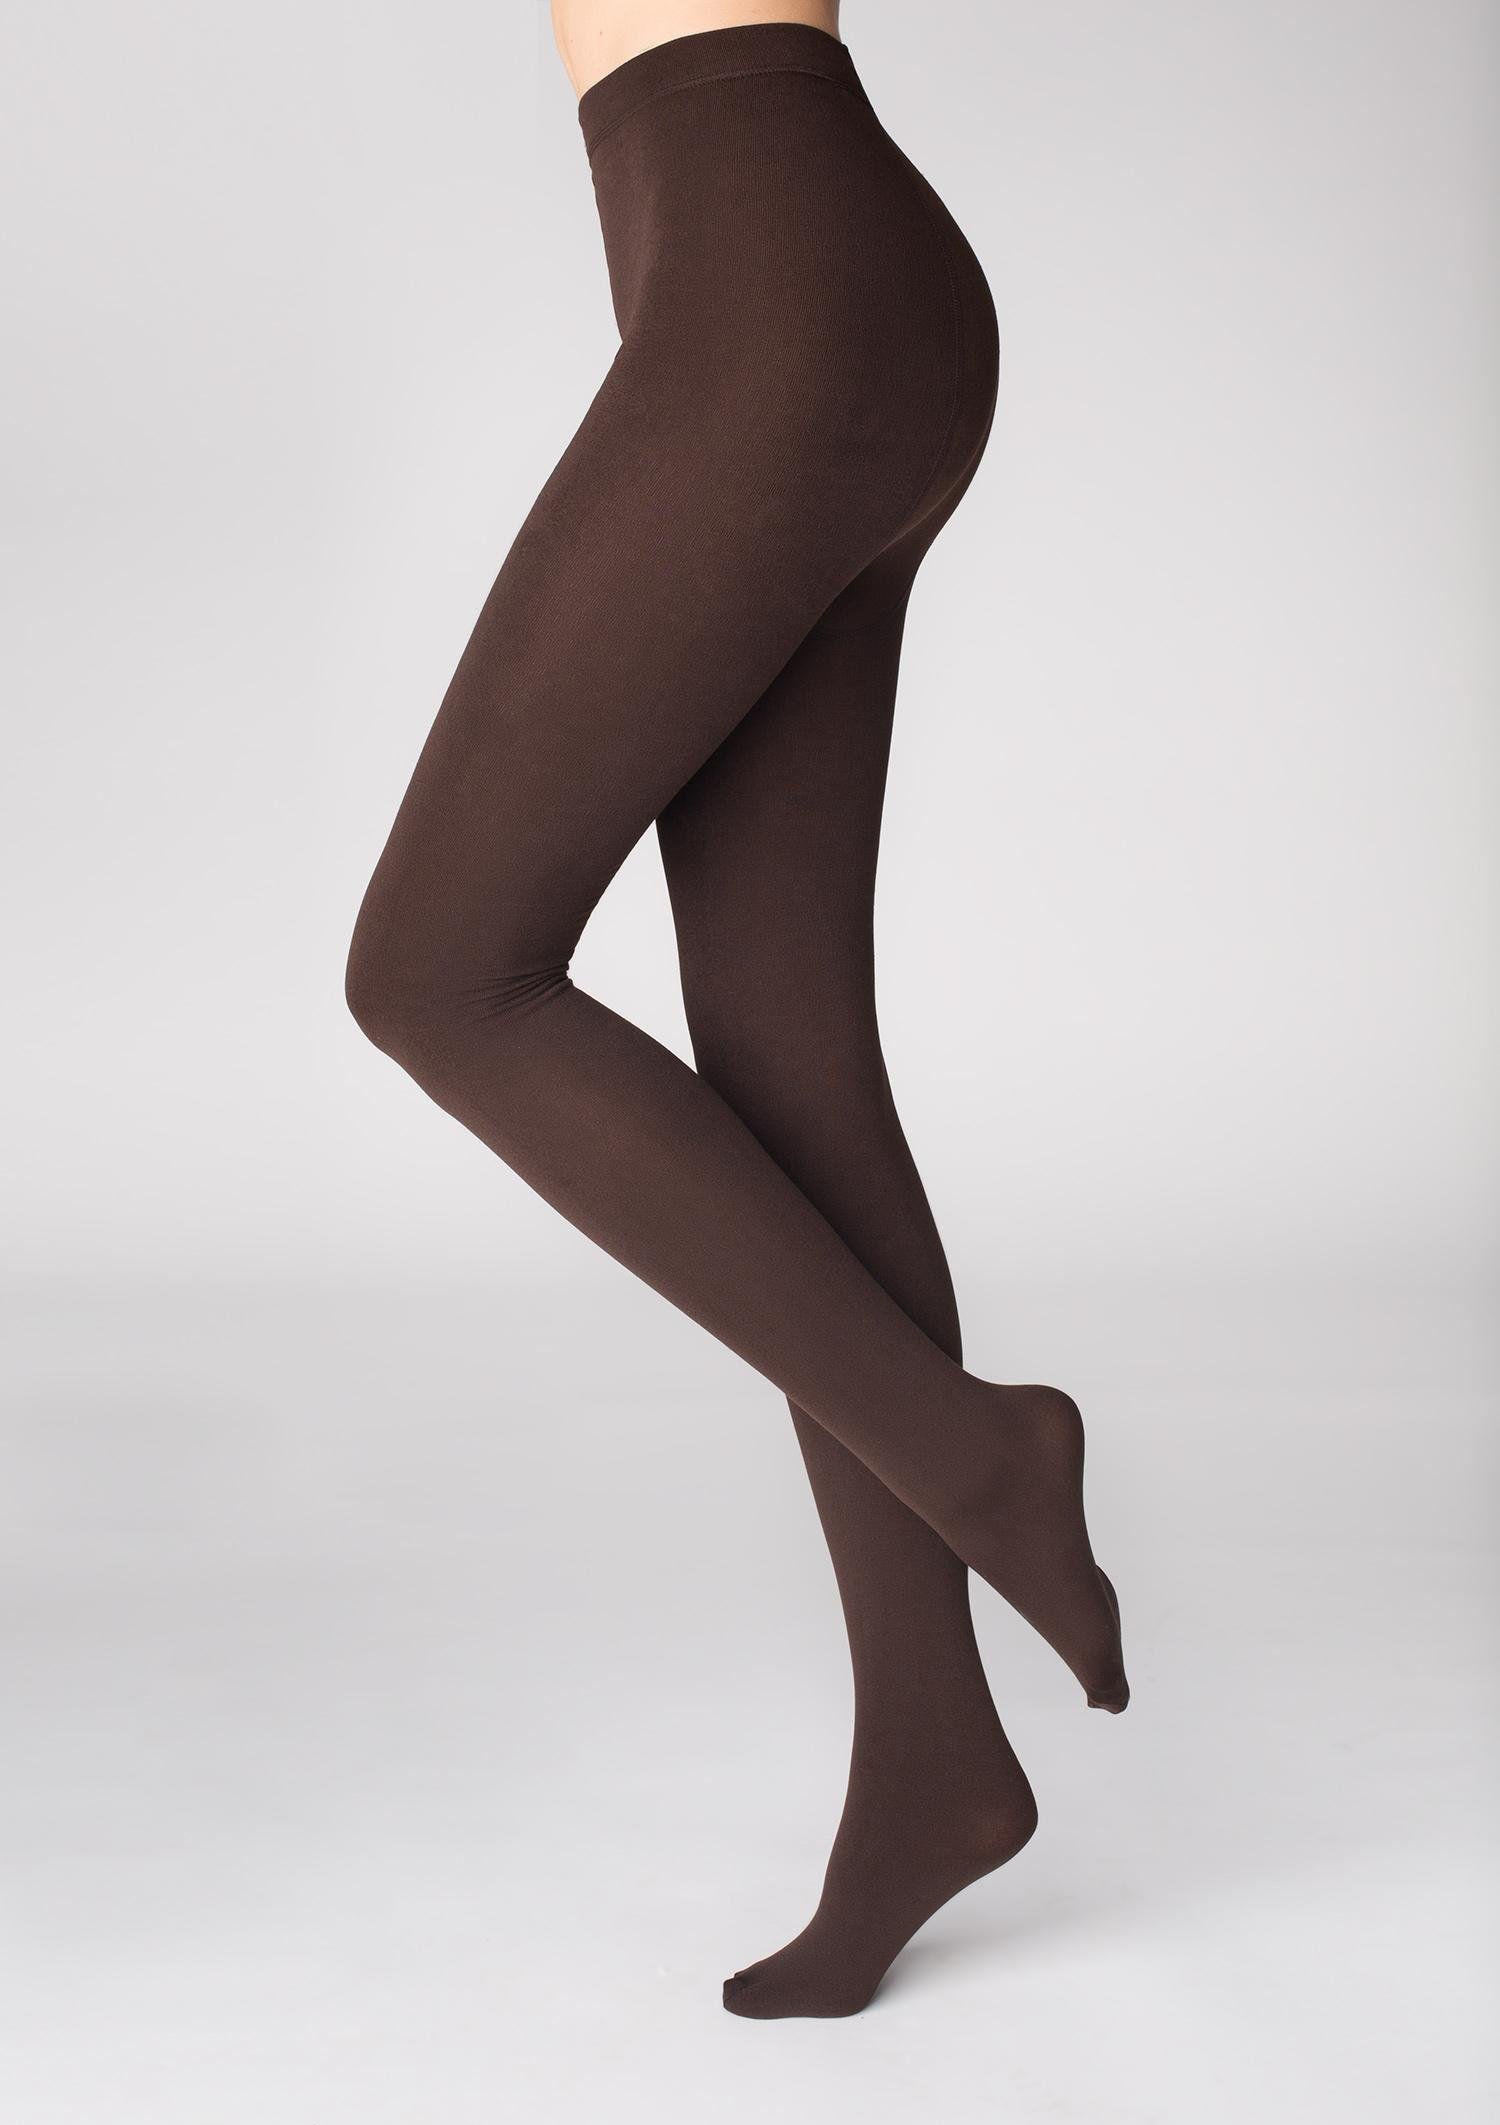 200 Denier Opaque Cotton Rich Tights Extra Thick Super Soft & Cosy in  Winter 